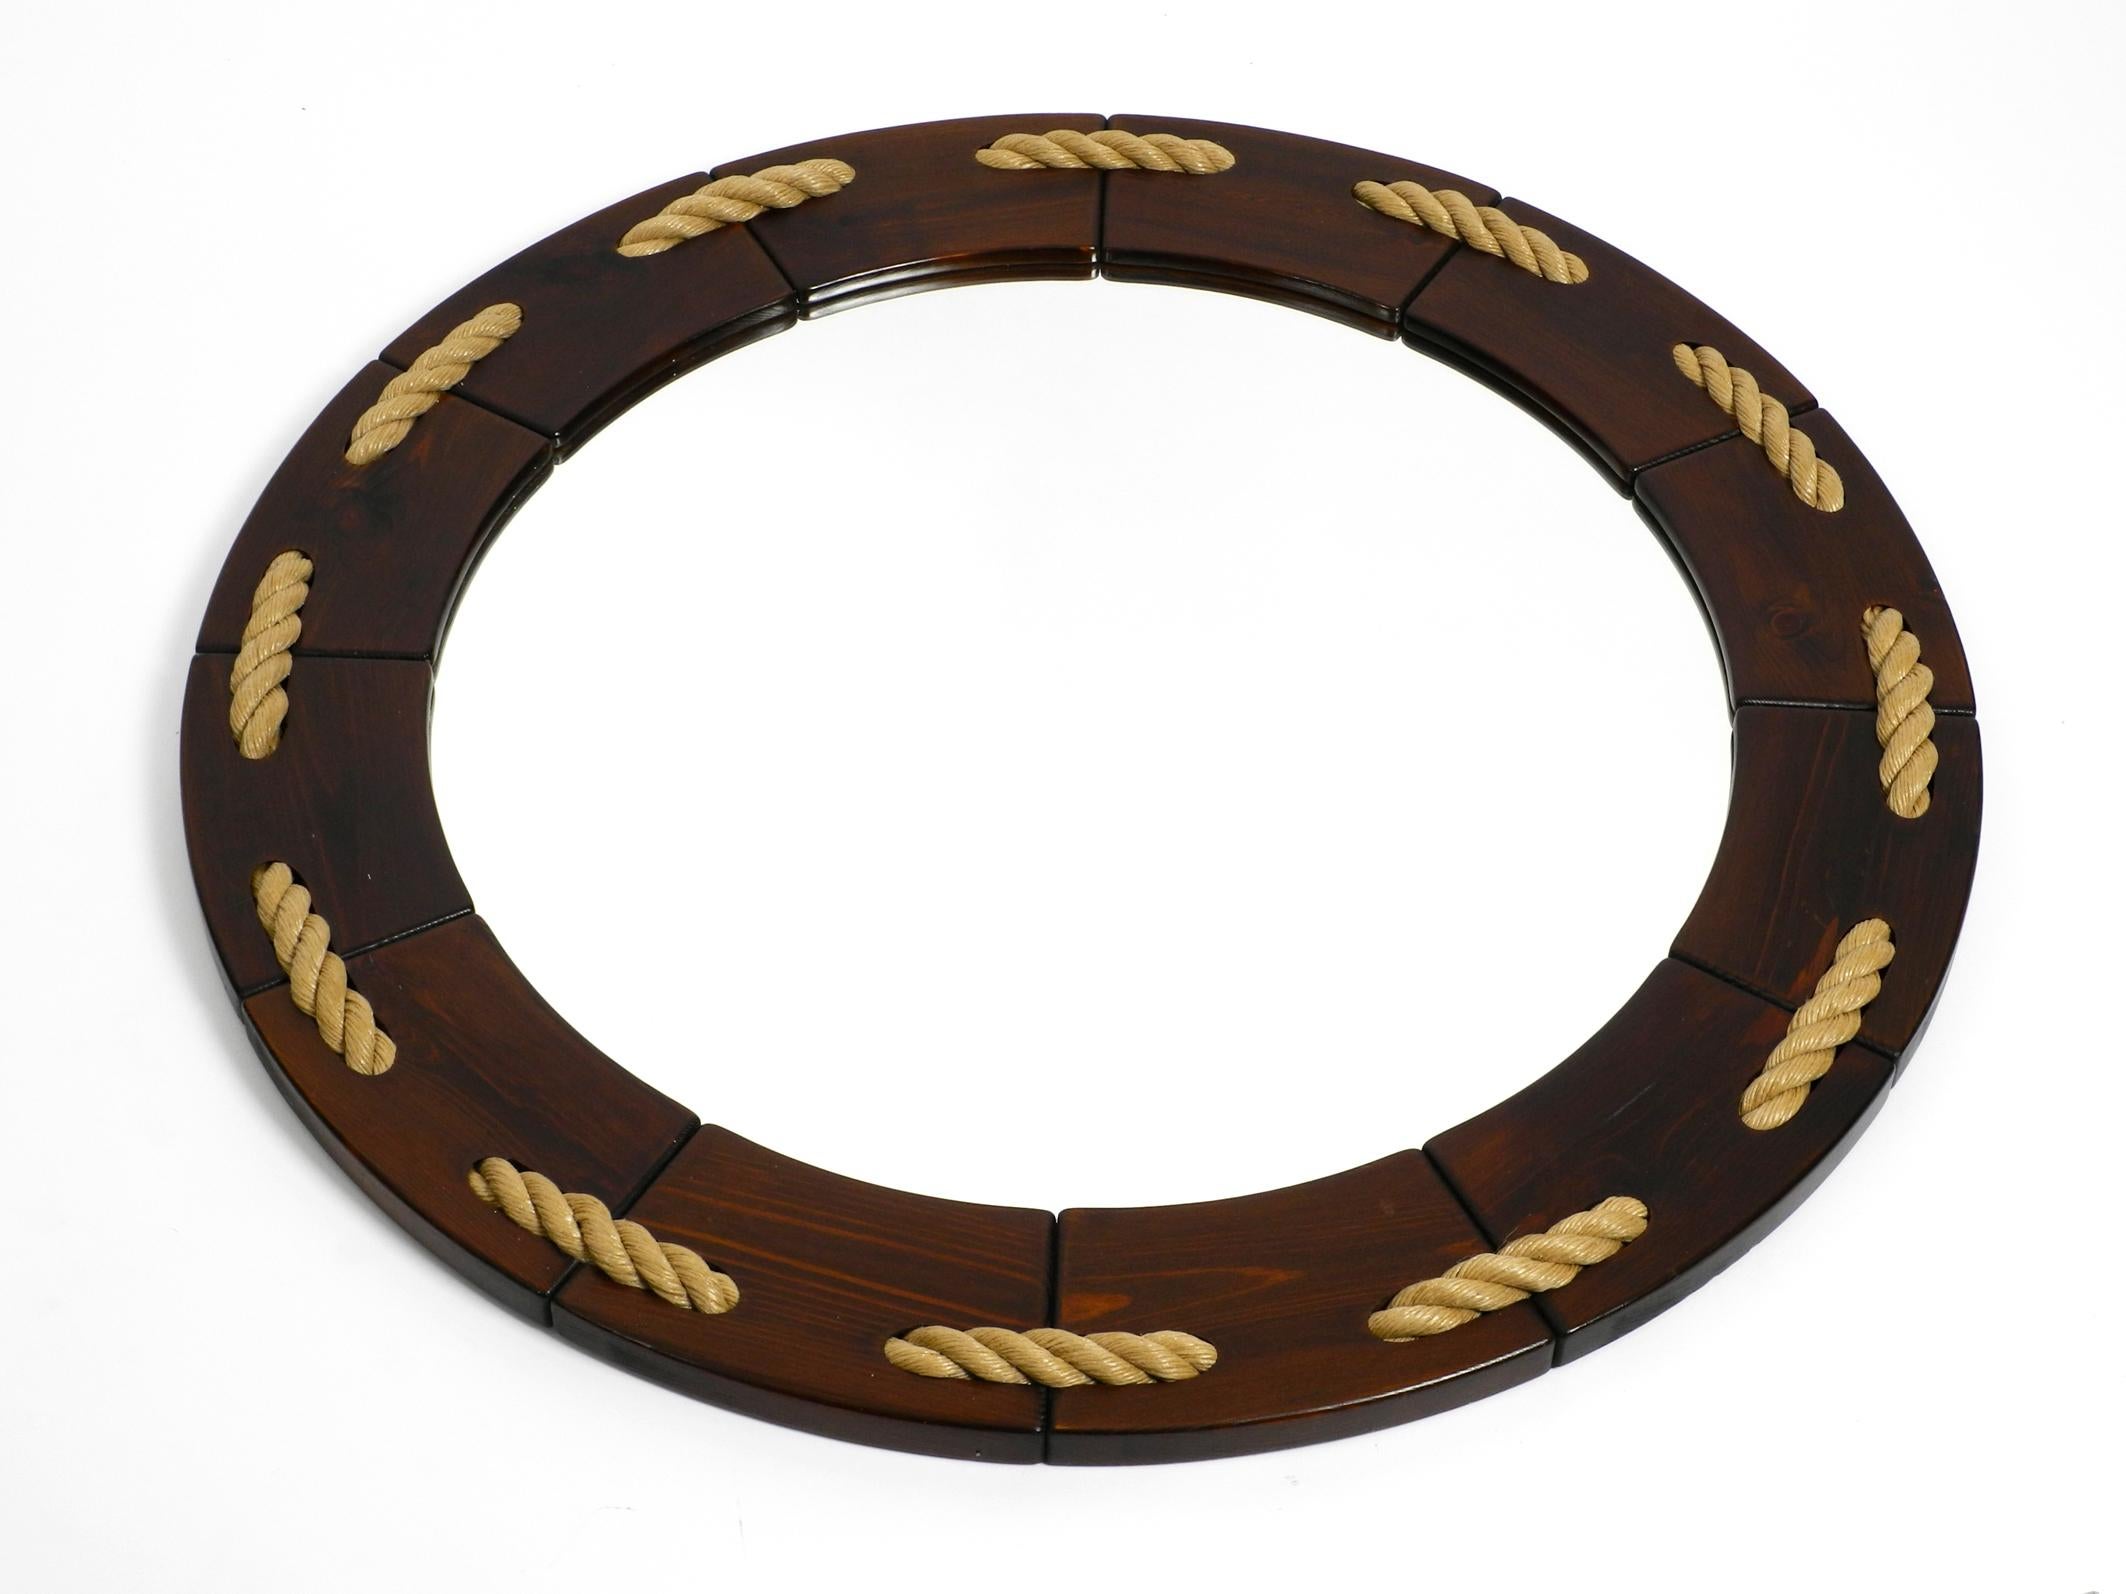 Huge 1970s maritime round pine wood wall mirror from Denmark.
Great minimalistic design in reddish brown with great pine grain.
Frame consists of several parts, held together by a thick braided sisal rope.
Gives the whole look a maritime style.